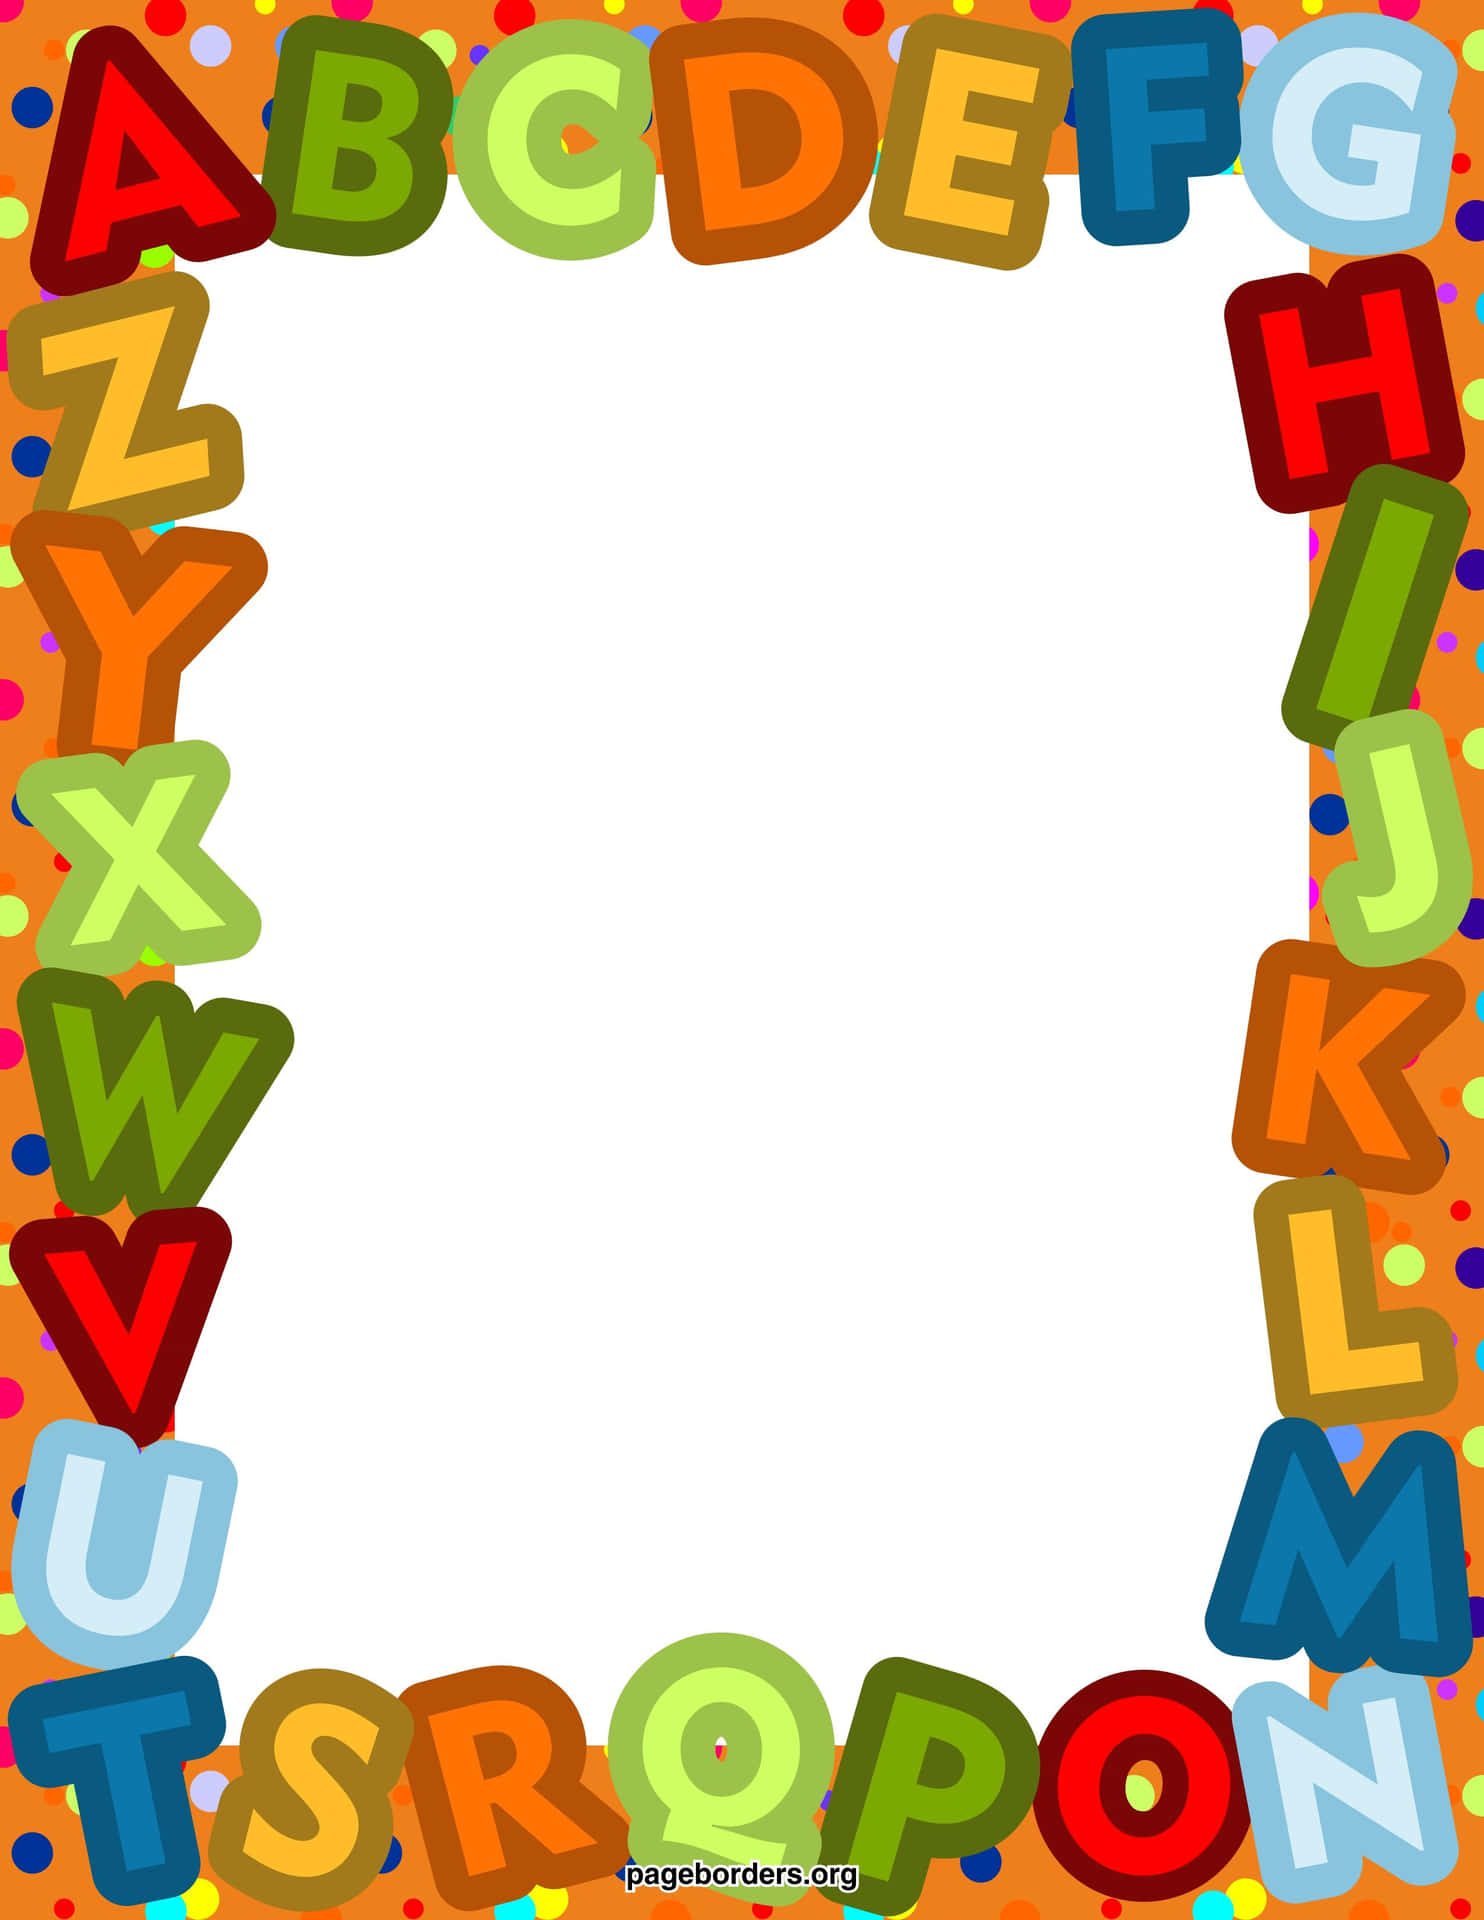 A Colorful Alphabet Frame With Colorful Letters